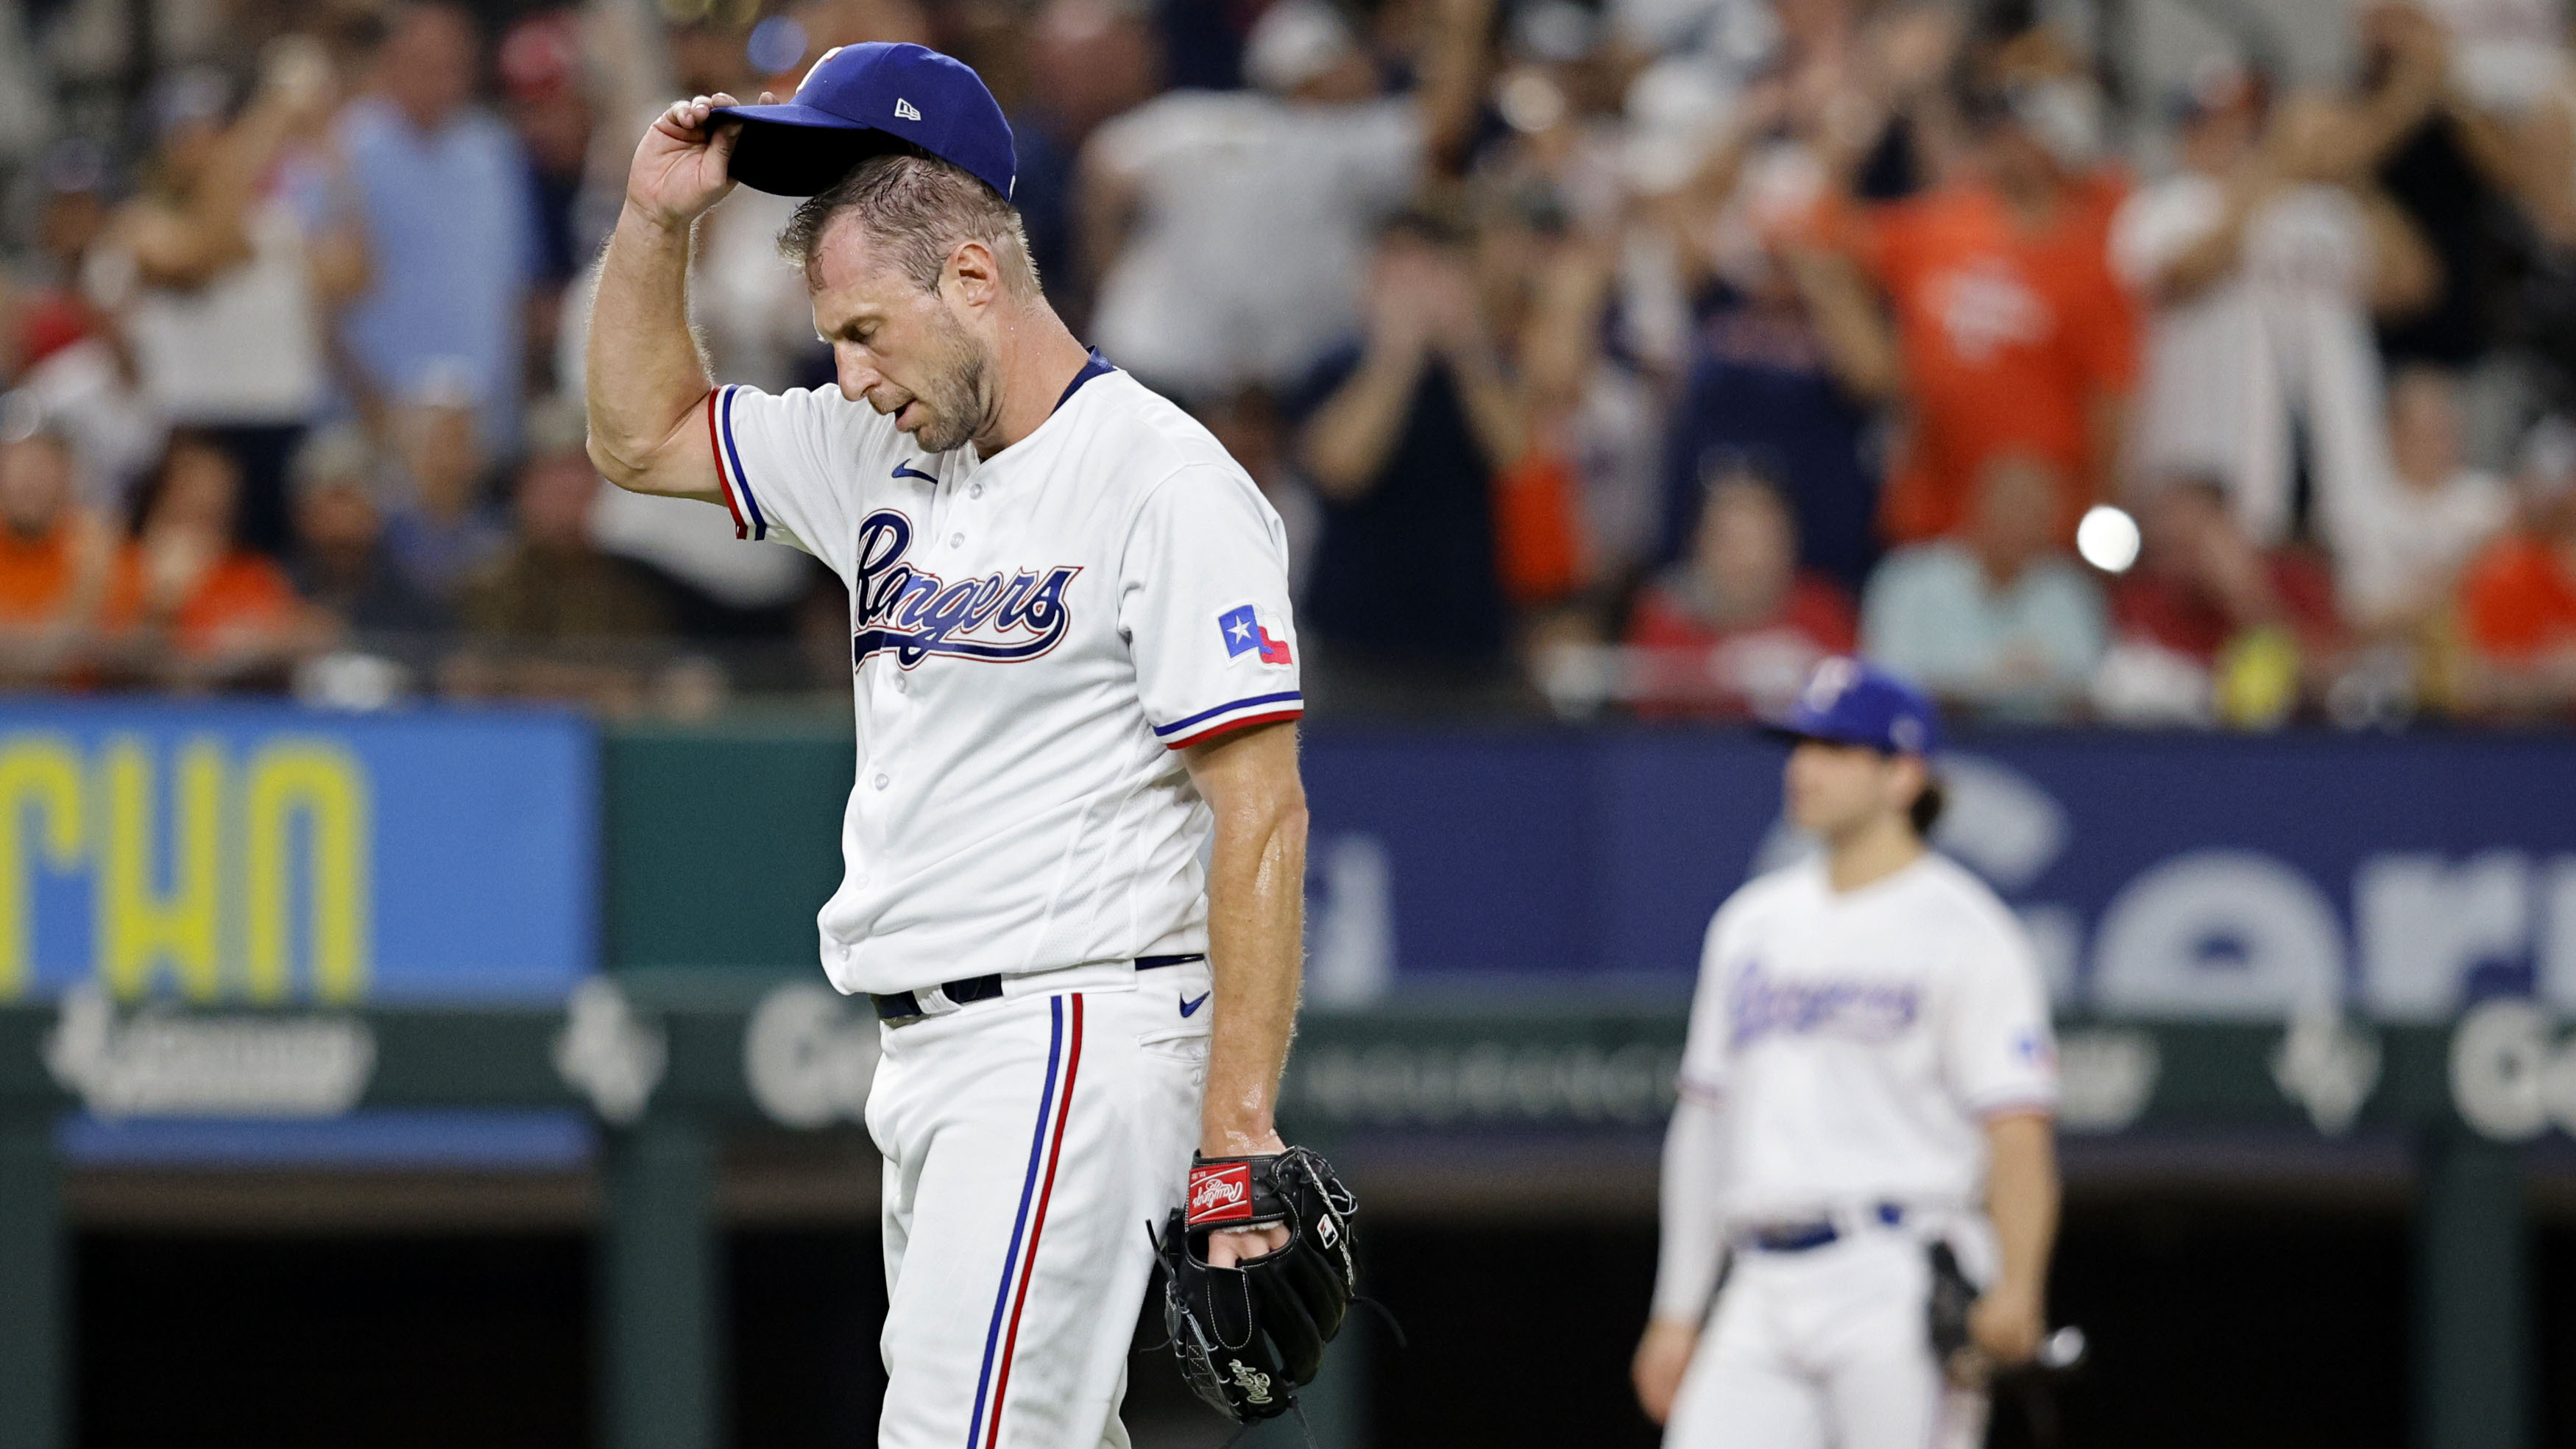 Houston Astros: Texas Rangers avoid sweep with blowout in chippy game